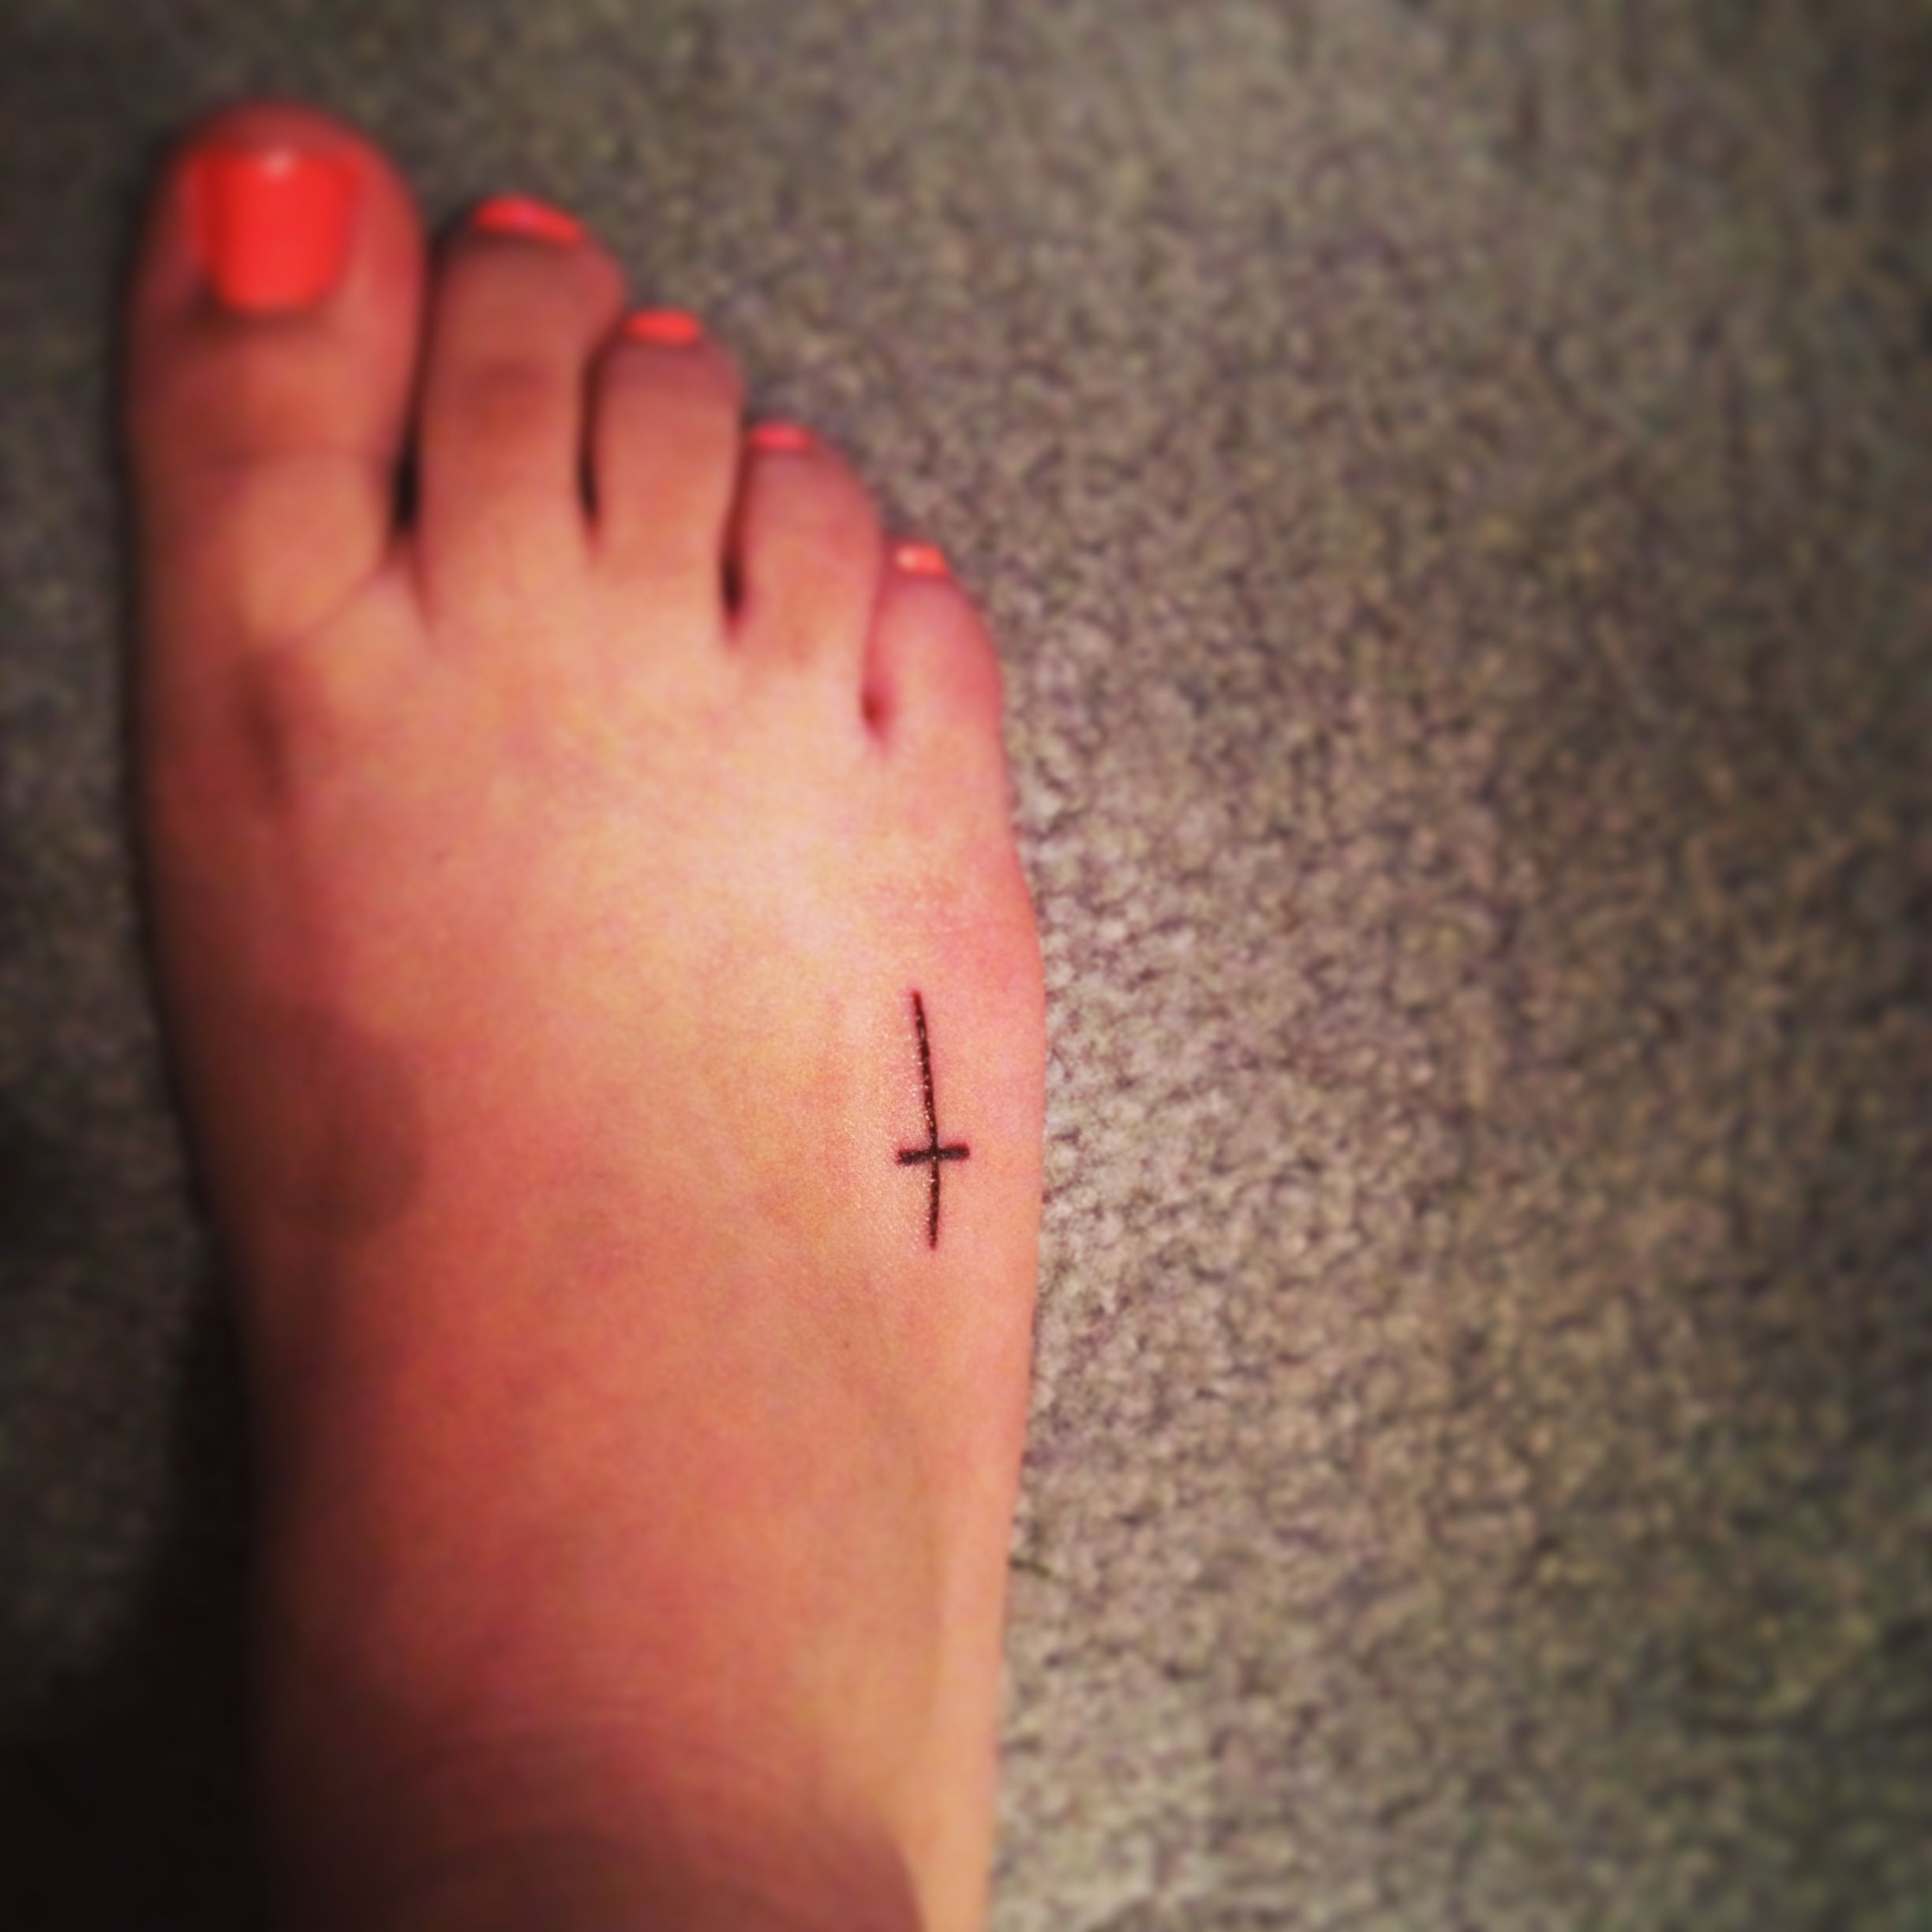 Tatted Tattoo Numbertwo Cross Foot Tattoos And Piercings intended for dimensions 2448 X 2448